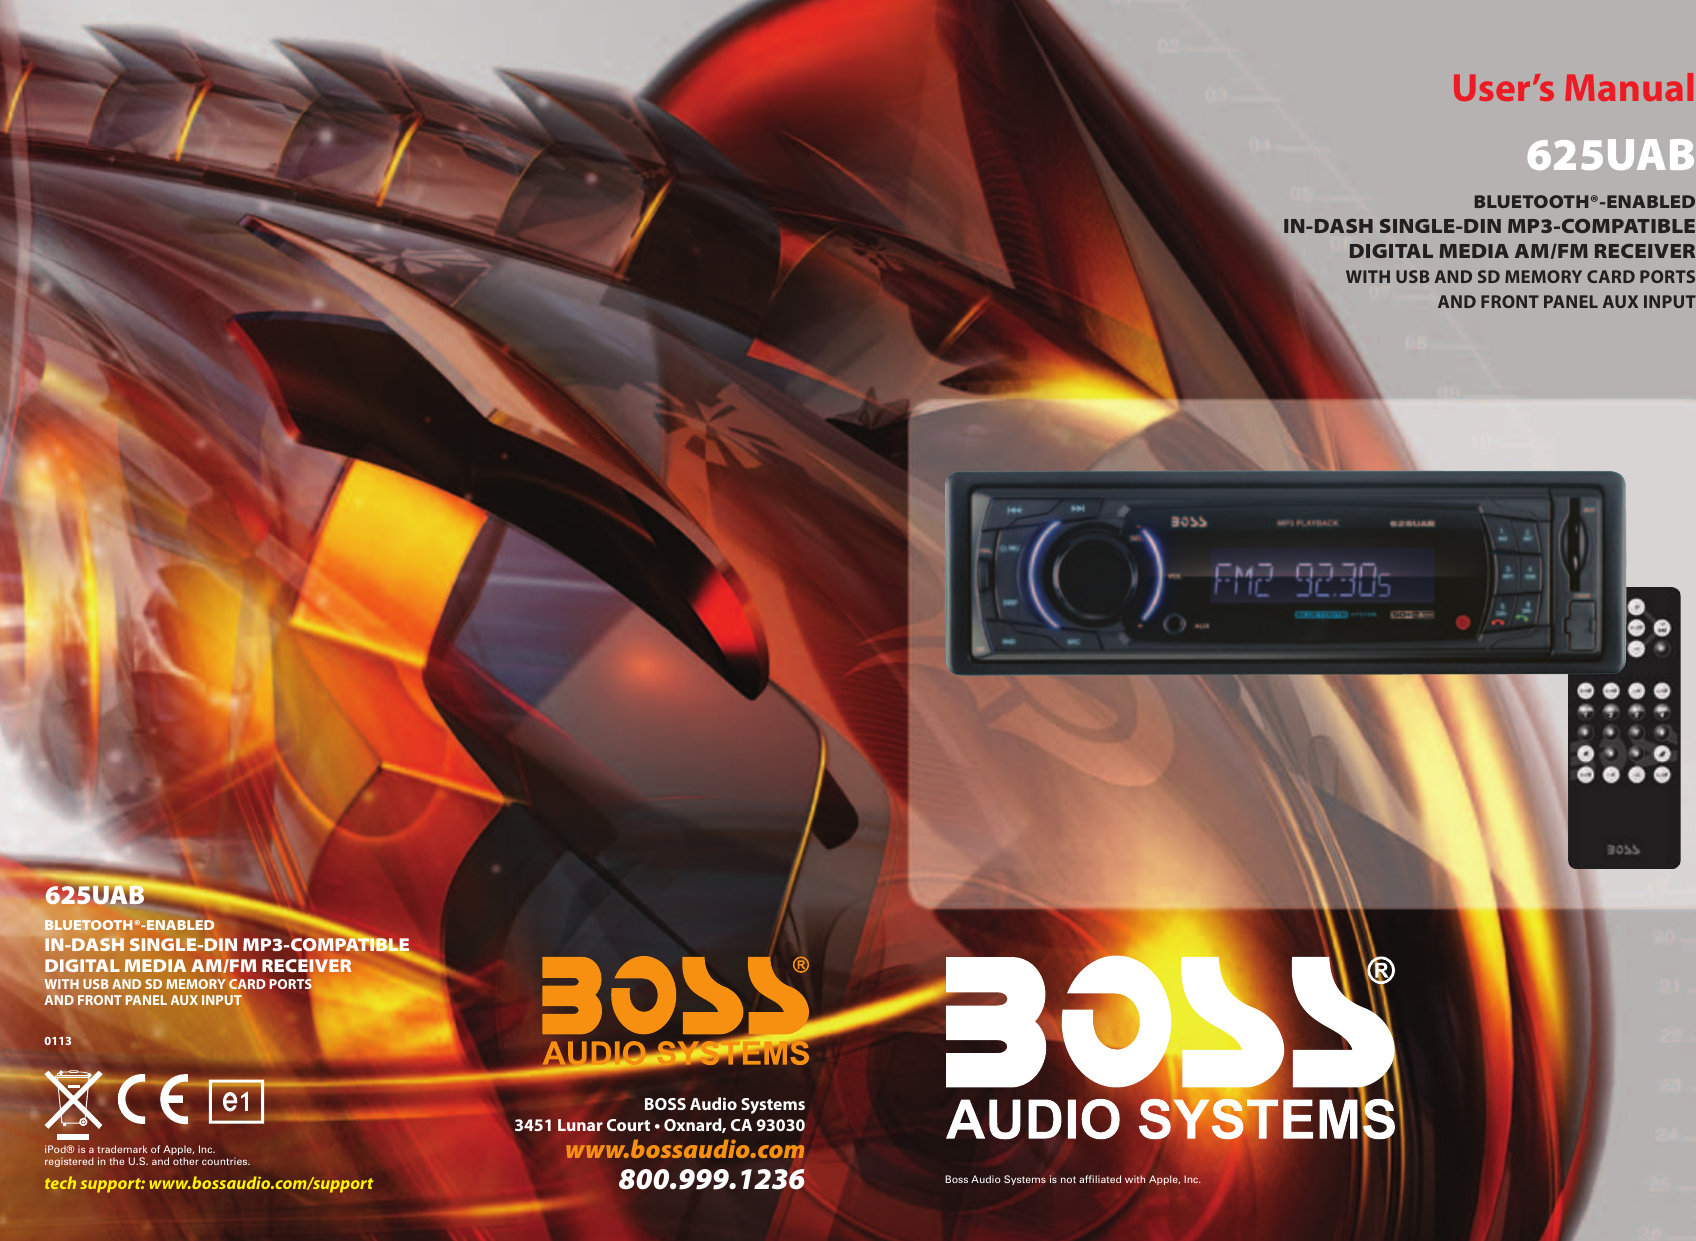 Page 1 of 6 - Boss-Audio-Systems Boss-Audio-Systems-Car-Stereo-System-625Uab-Users-Manual- BOSS 625UAB+0705RUHRF+MP3+WMA...  Boss-audio-systems-car-stereo-system-625uab-users-manual